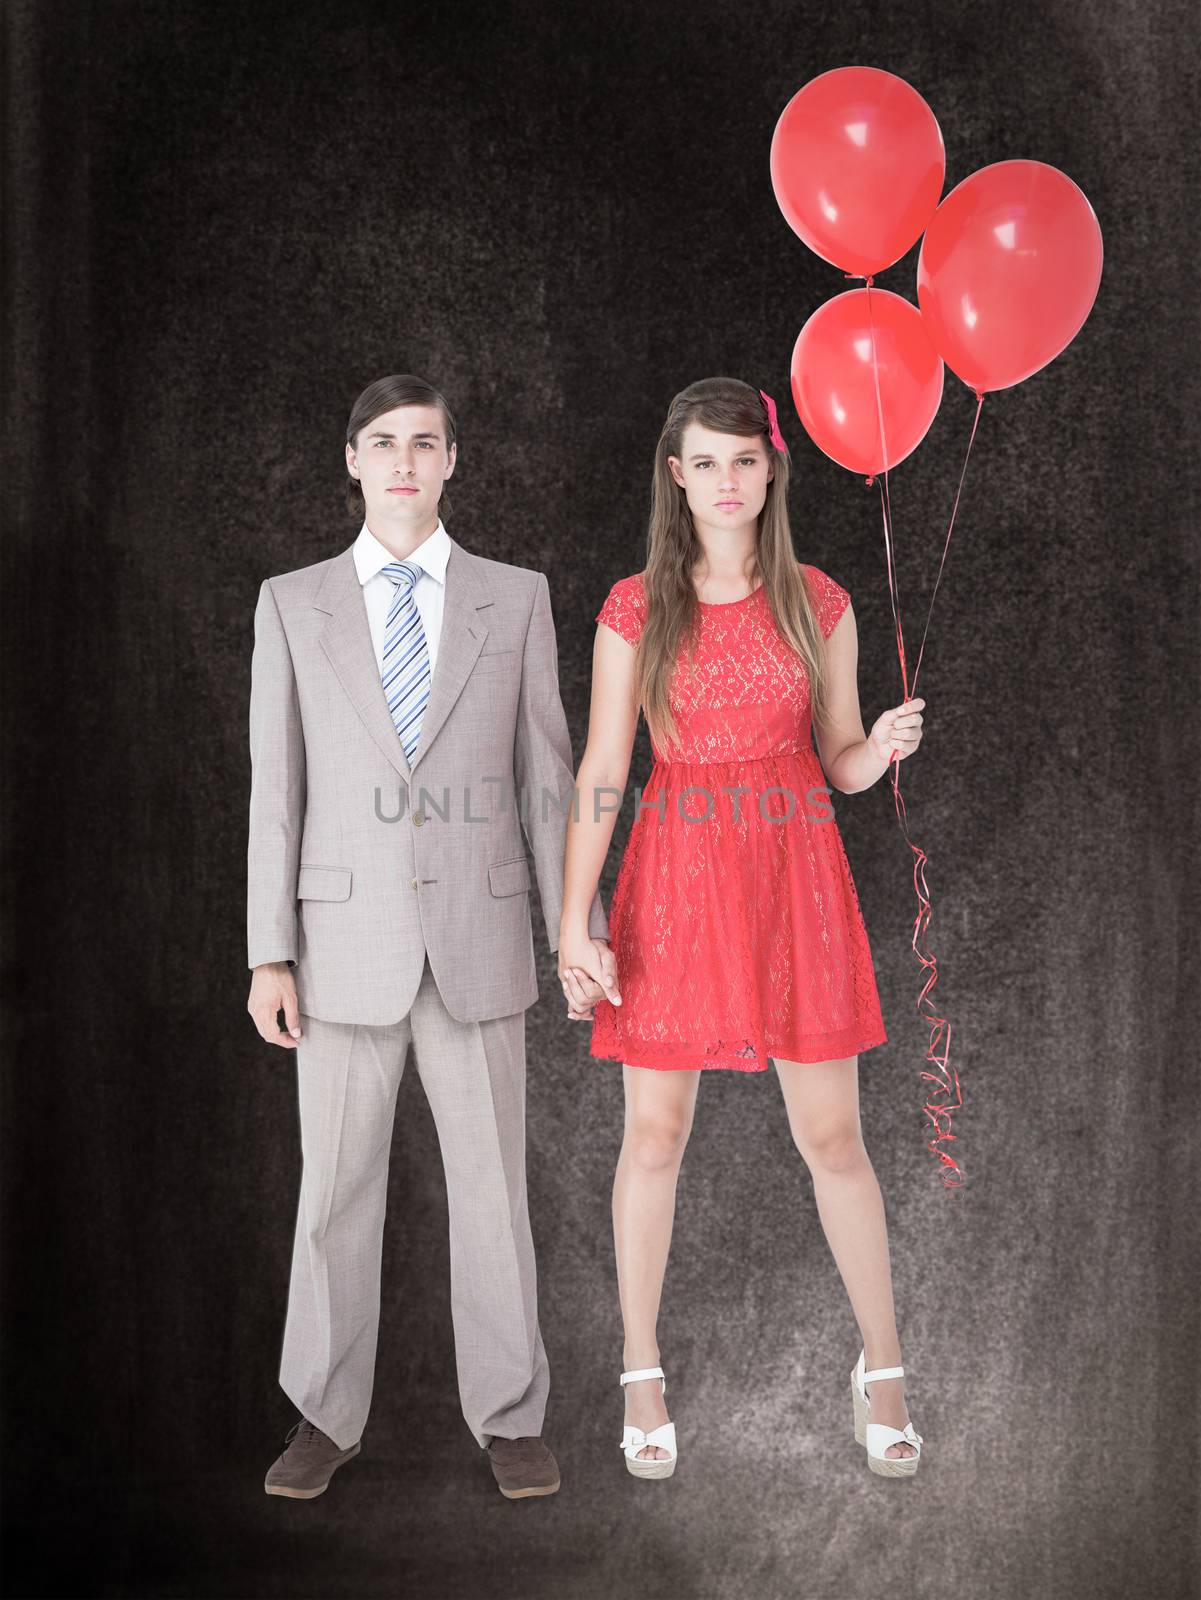 Unsmiling geeky couple standing hand in hand against black background